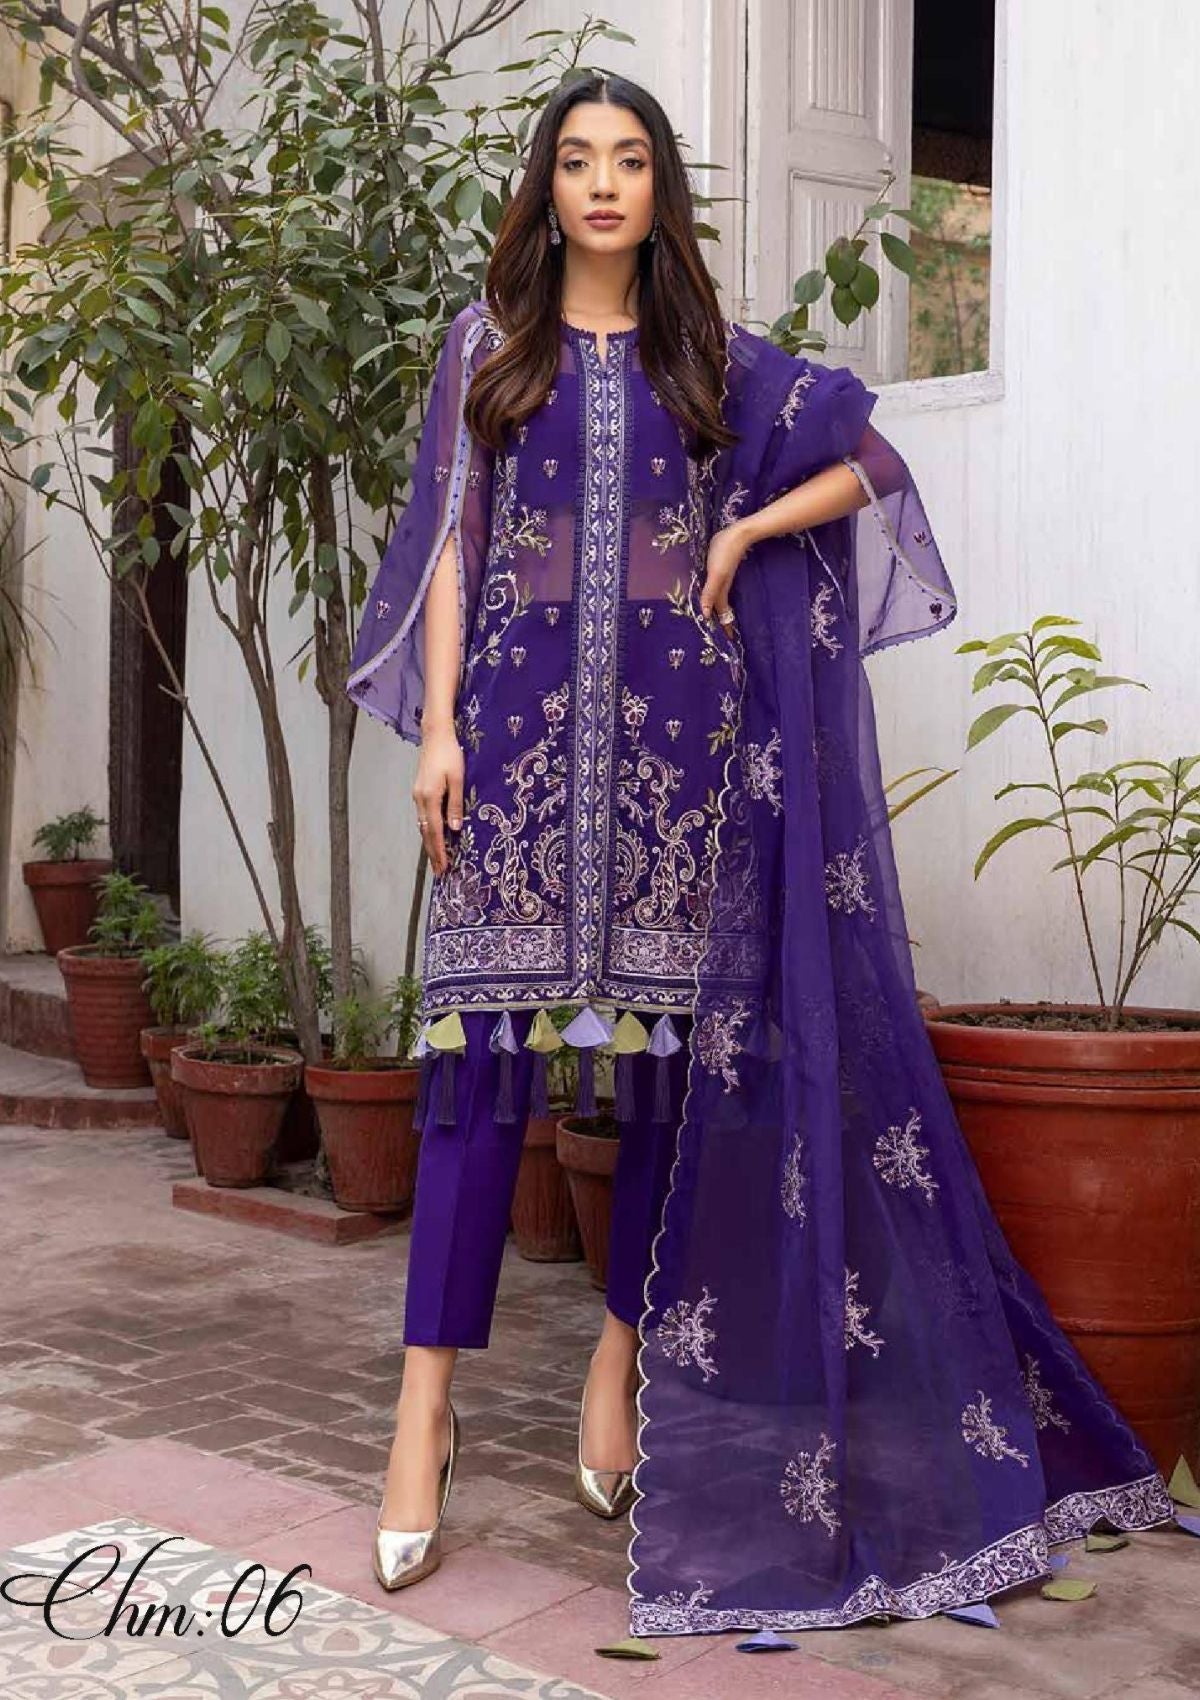 Formal Dress - Charizma - Chimmer -Vol1 - CHM#06 available at Saleem Fabrics Traditions